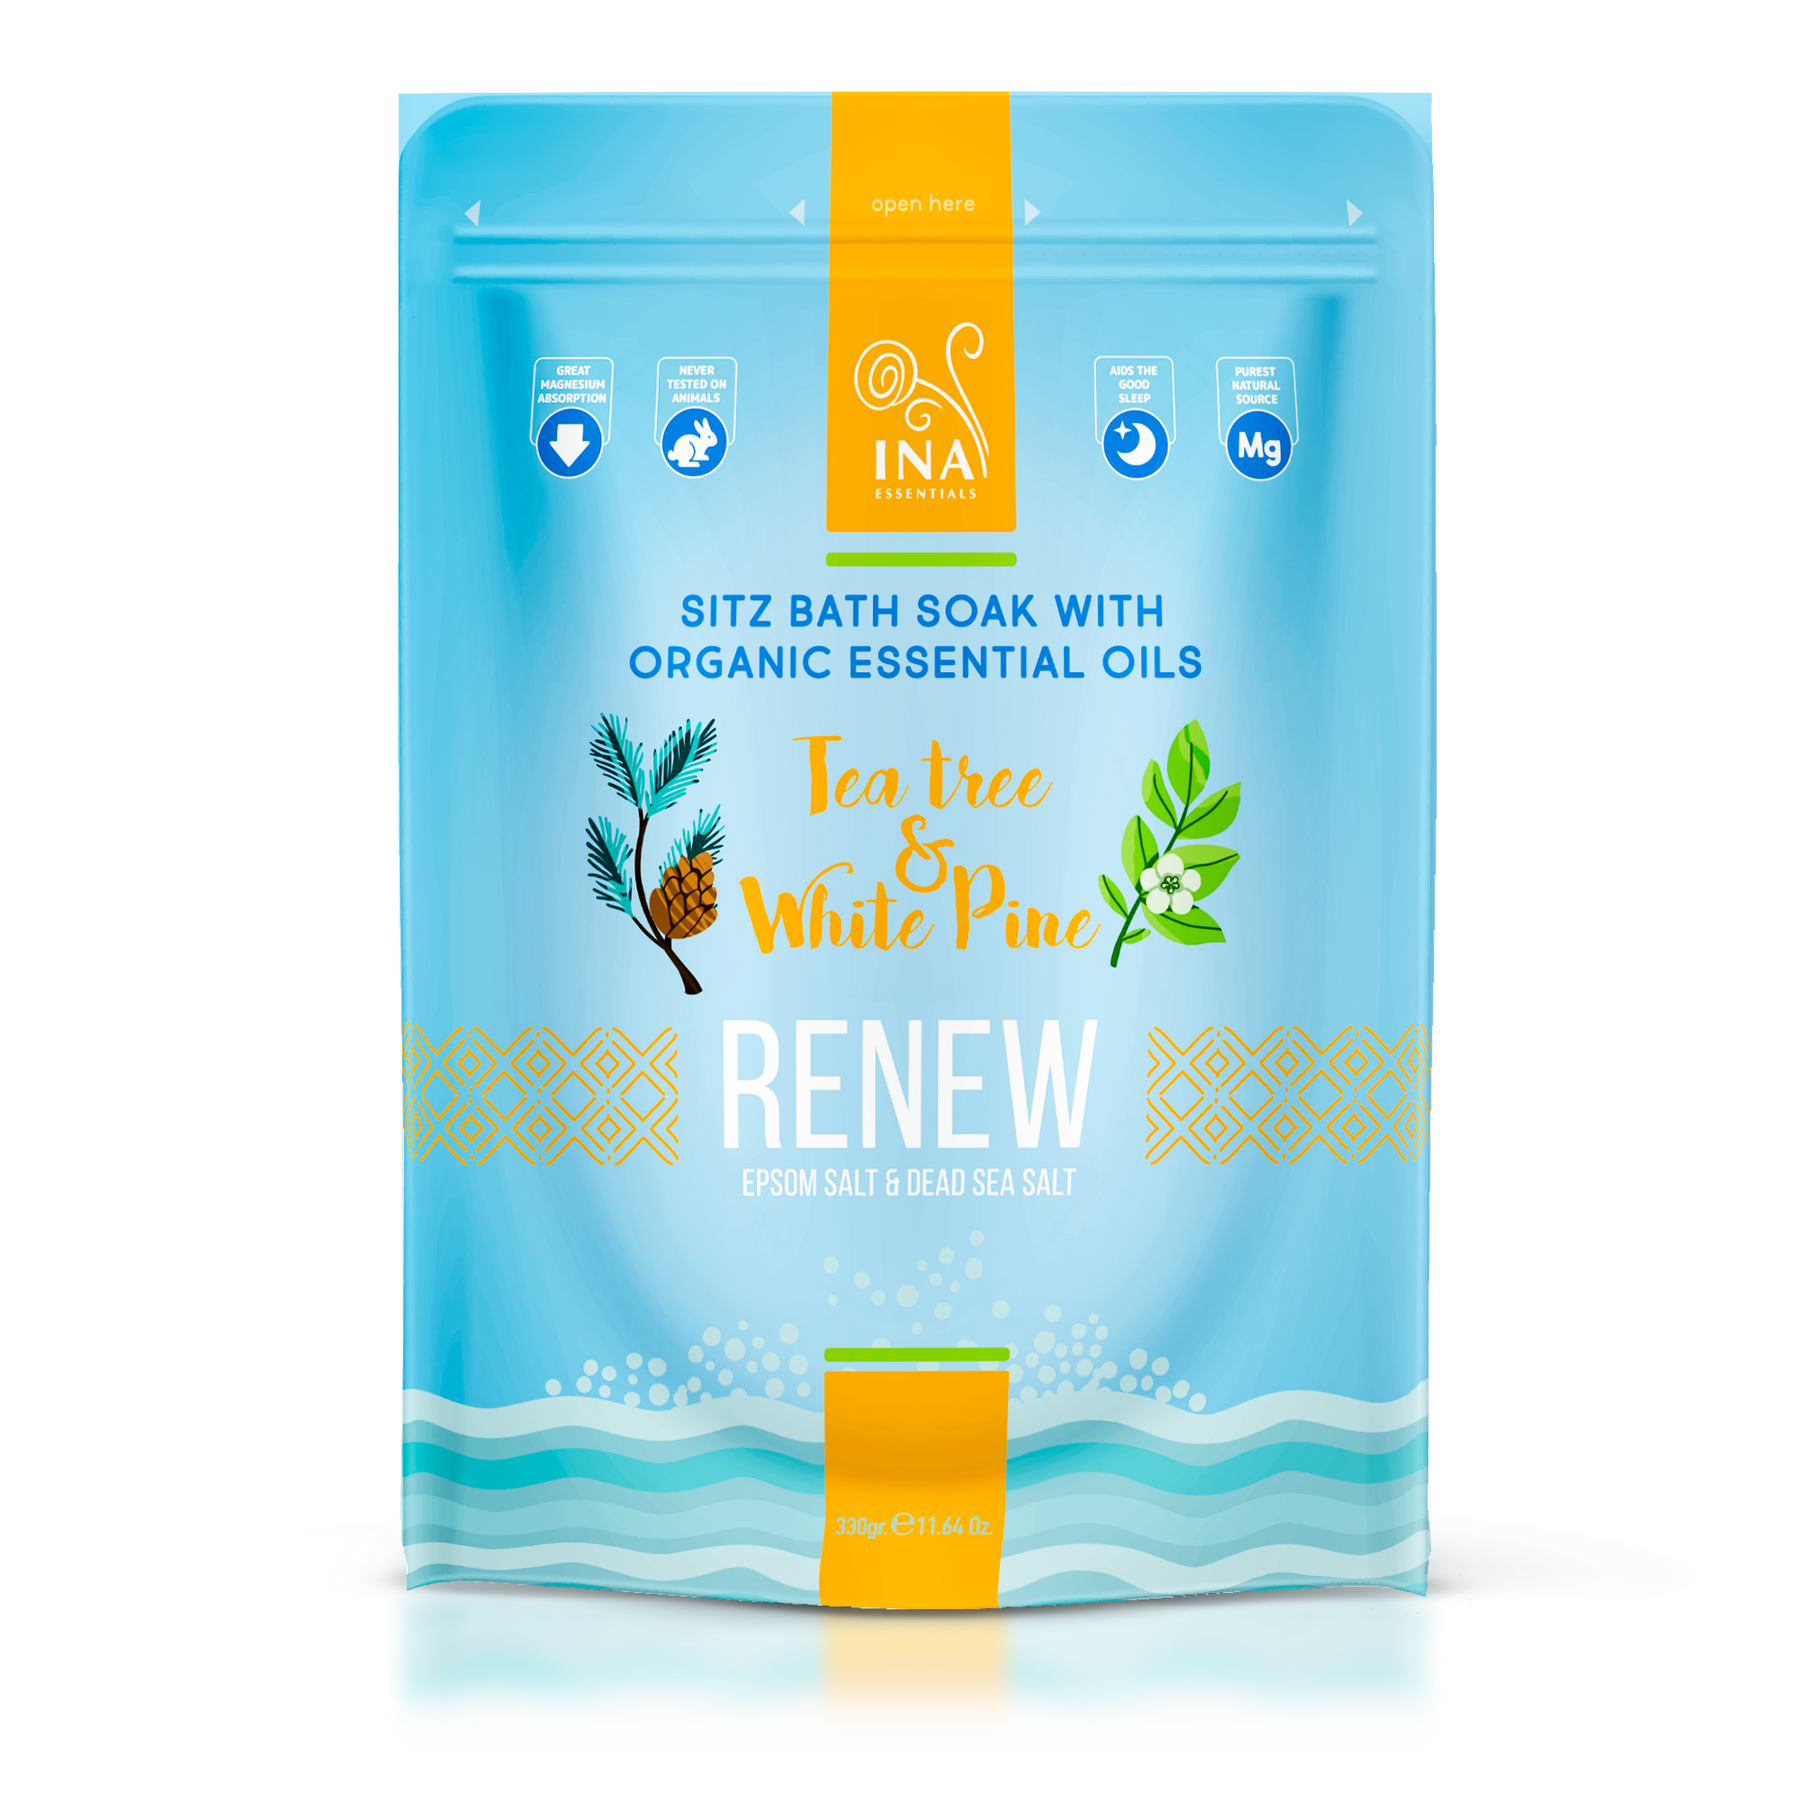 Renew– Sitz bath salts with Tea tree and White pine for tired legs and fungus